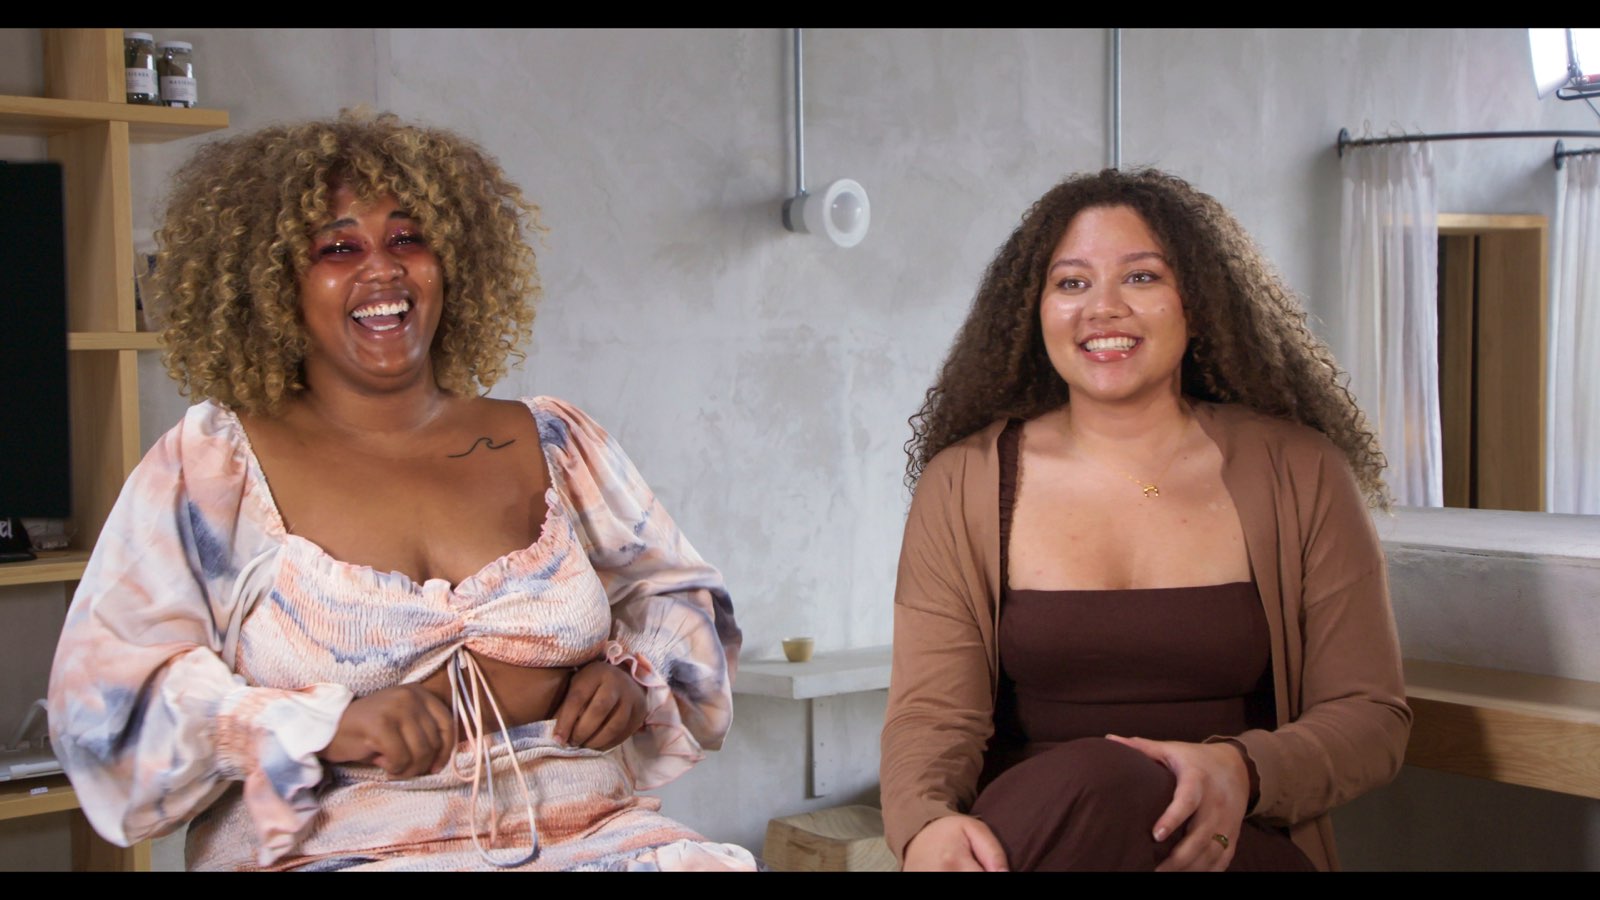 Two women with long curly hair sit on stools and laugh.